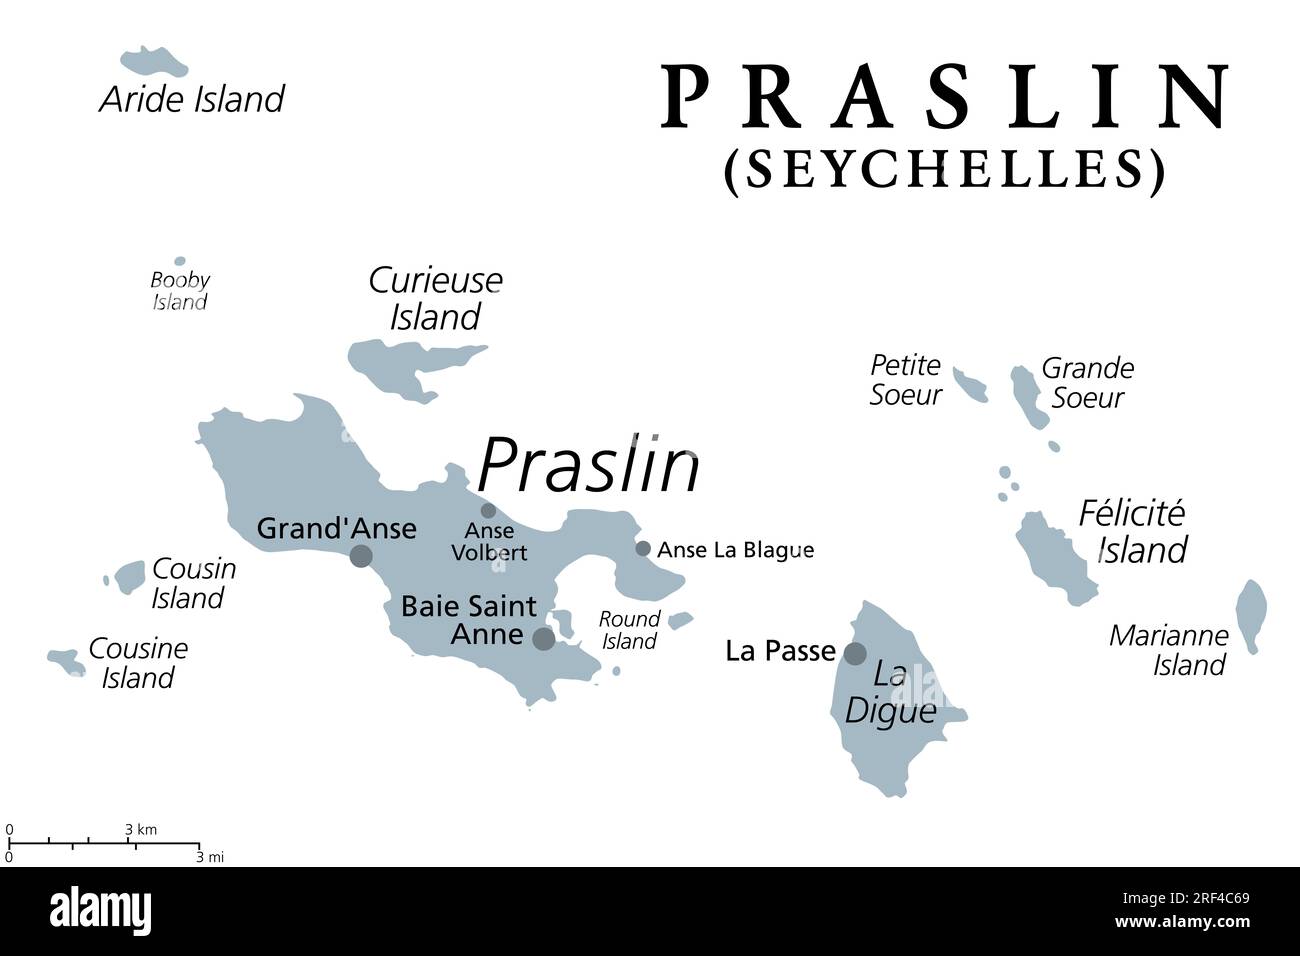 Praslin and nearby islands, gray political map. Second largest islands of the Seychelles, a Republic and archipelagic state in the Indian Ocean. Stock Photo